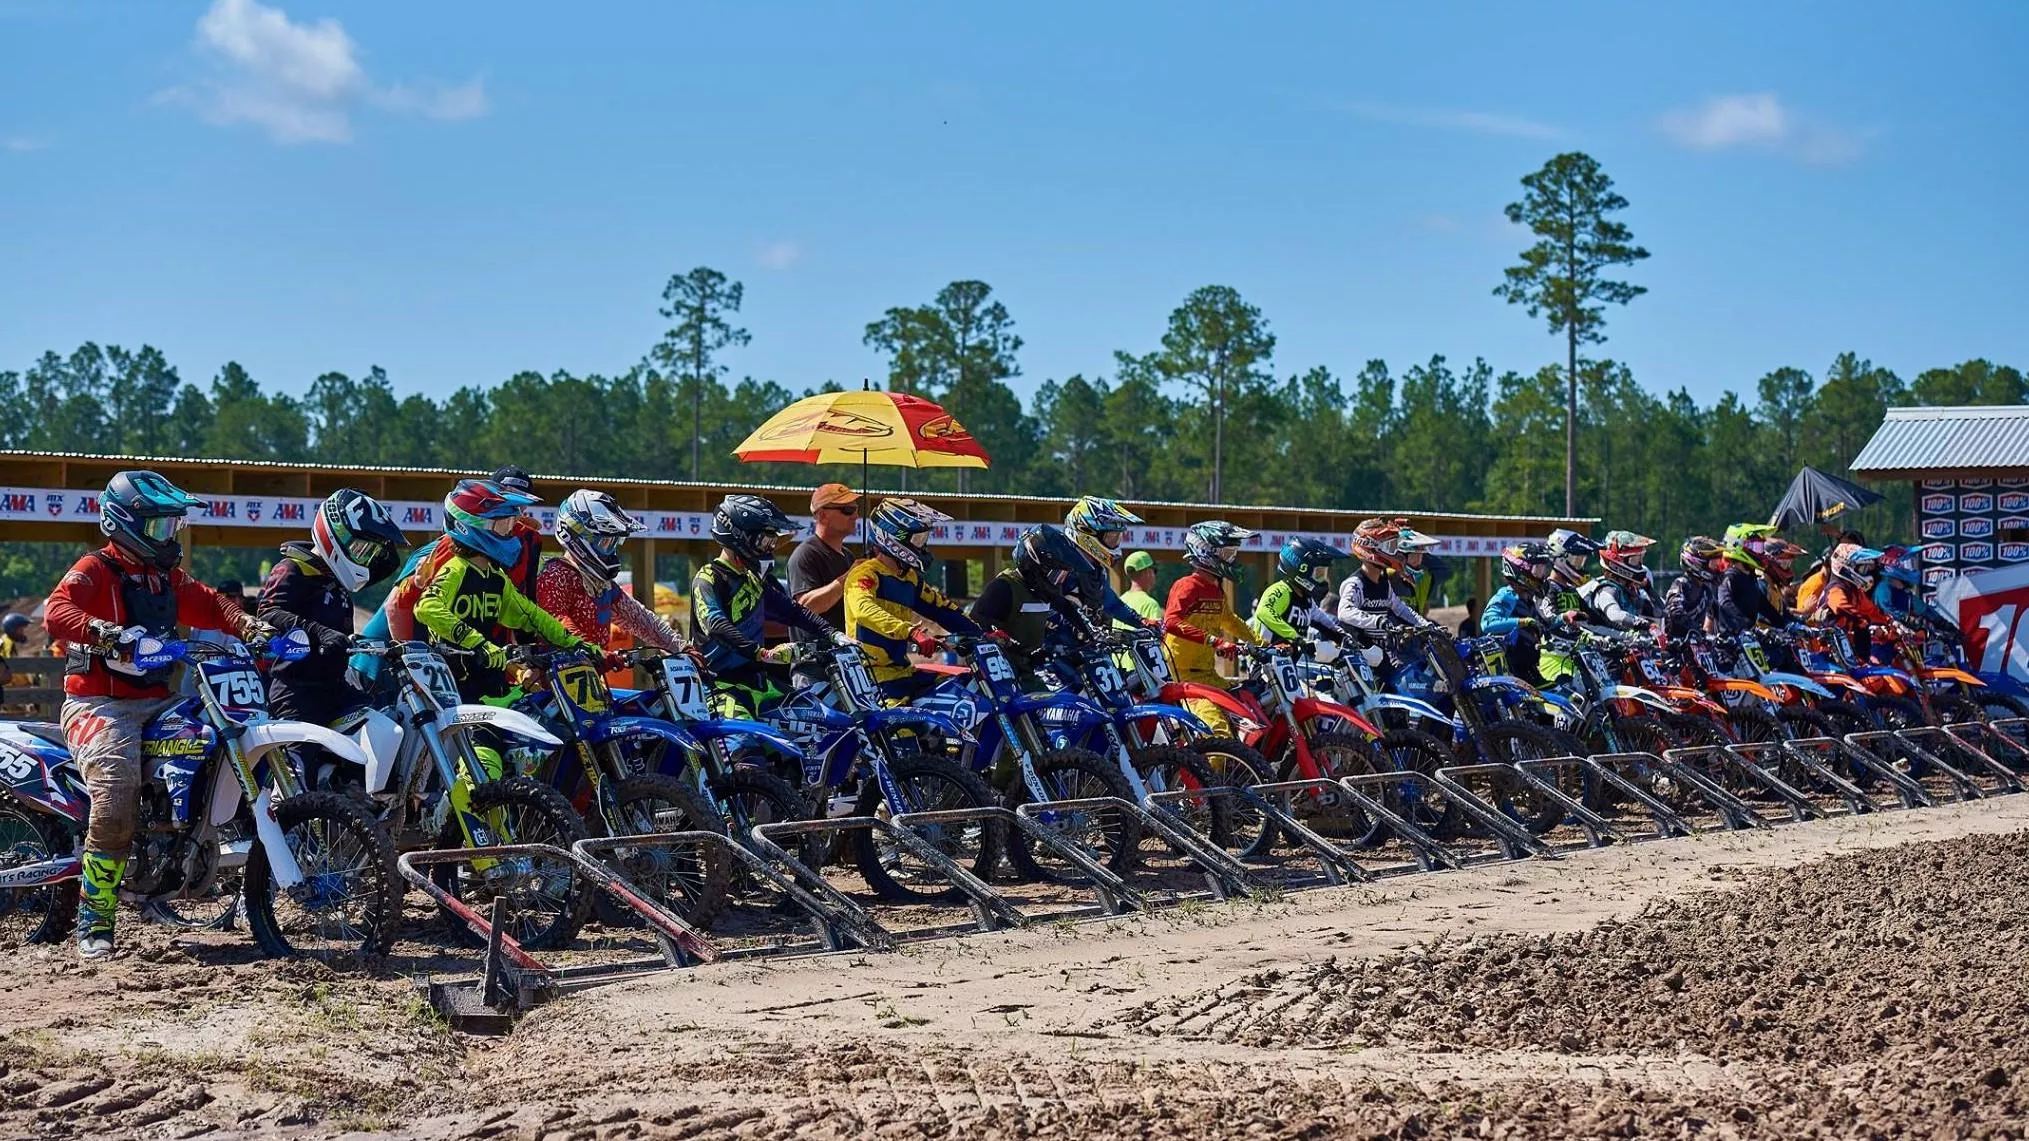 West Moto Park in Australia, Australia and Oceania | Motorcycles - Rated 0.9